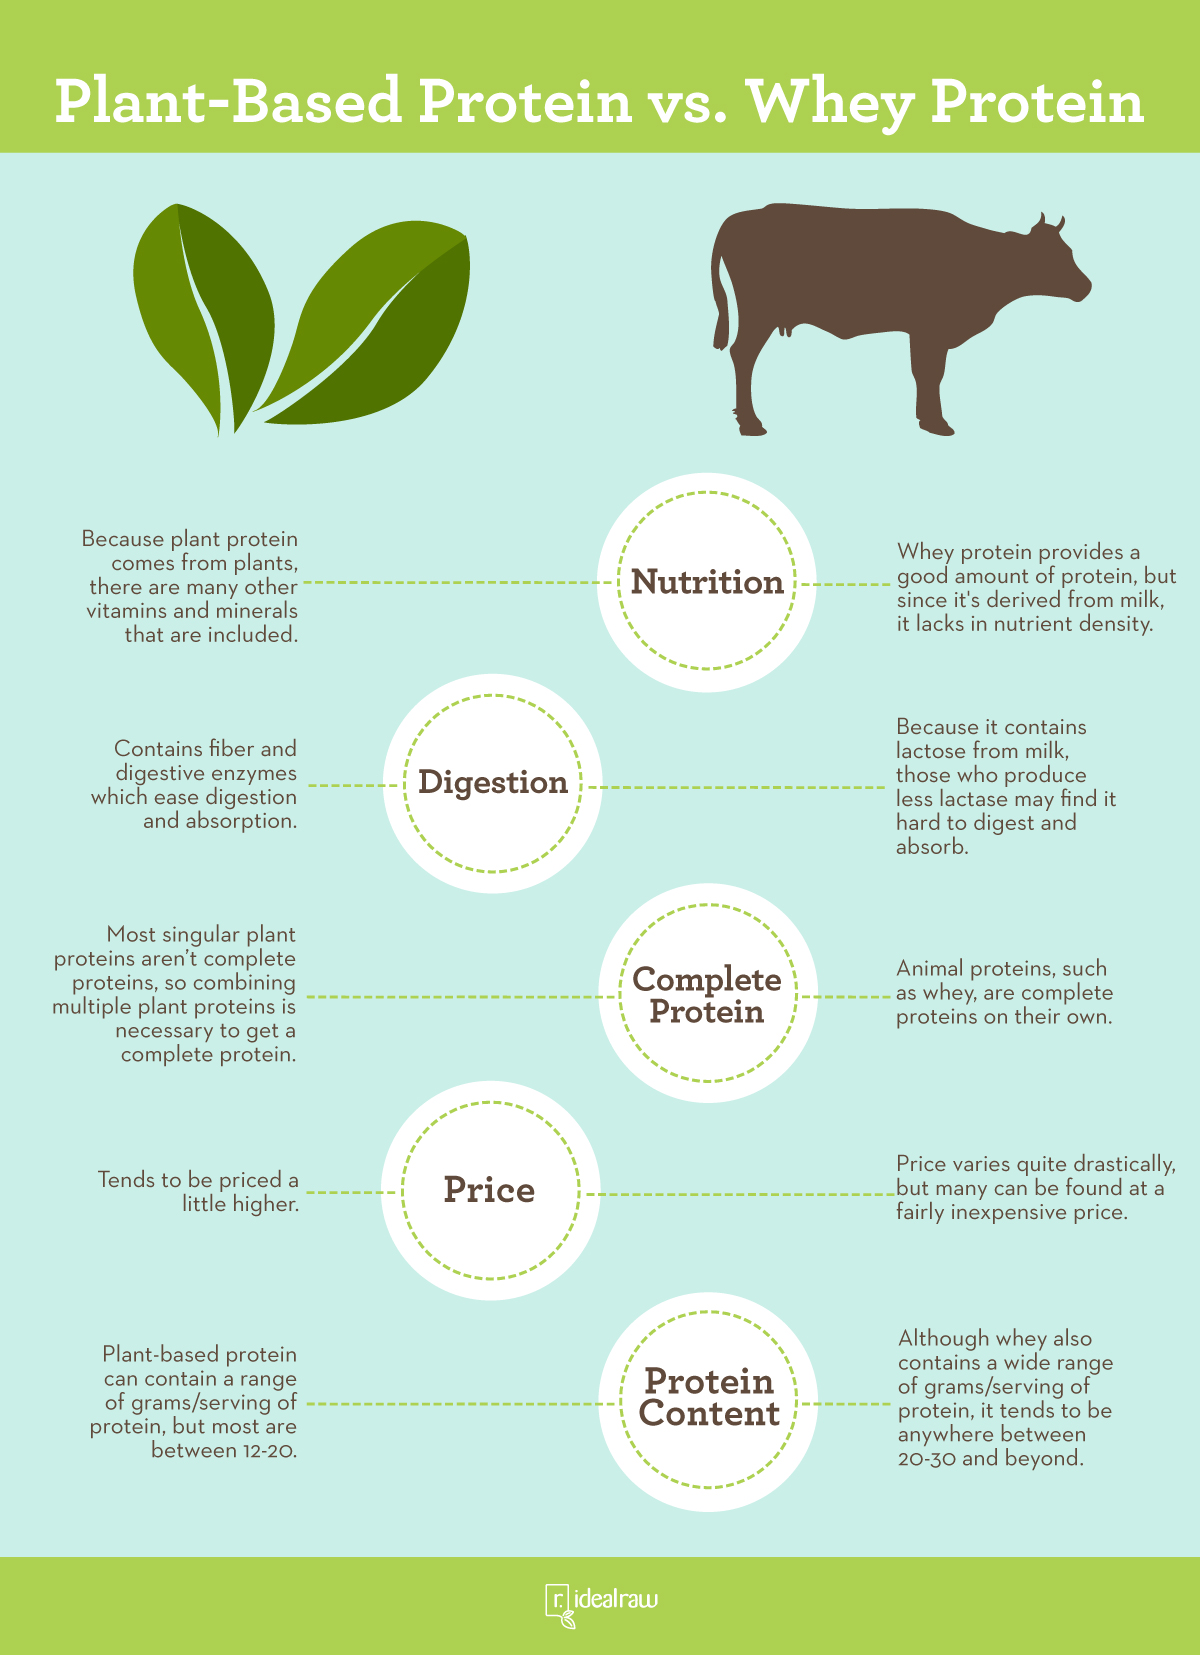 Plant Protein vs Whey Protein: What's Better For You? [INFOGRAPHIC] -  IdealRaw